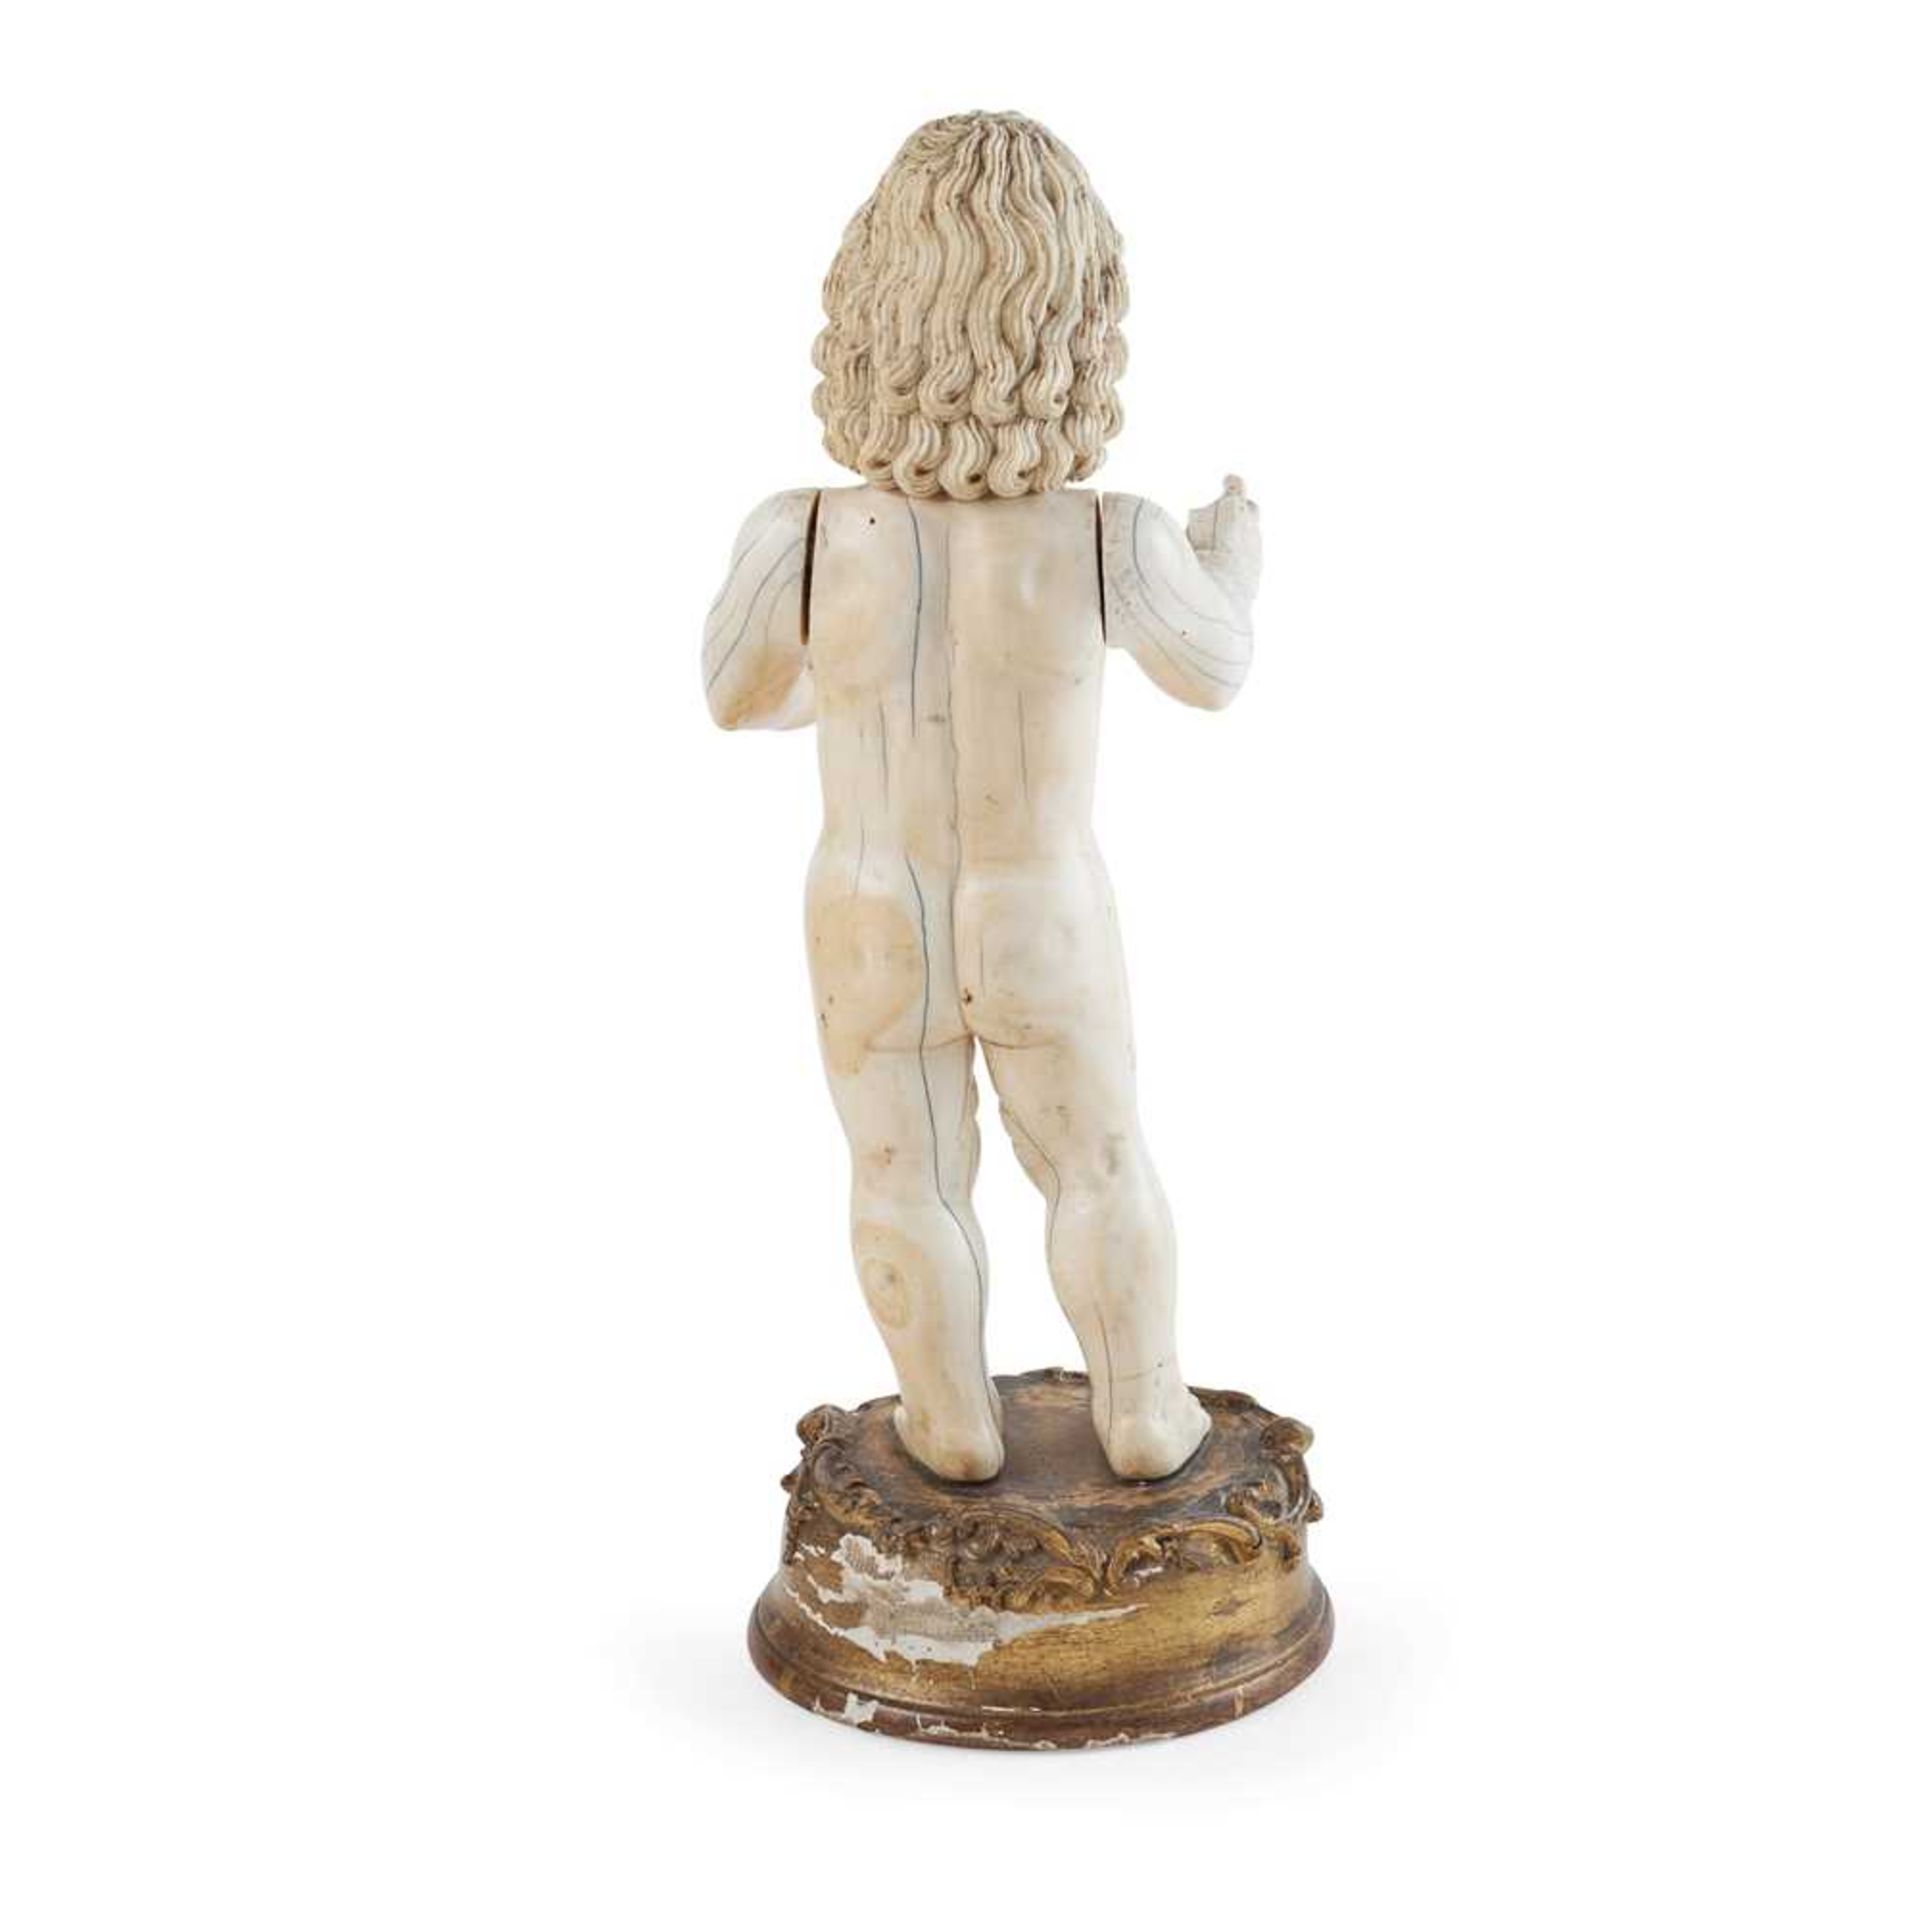 LARGE INDO-PORTUGUESE CARVED IVORY FIGURE OF THE INFANT CHRIST AS SALVATOR MUNDI, THE SAVIOUR OF THE - Image 3 of 7